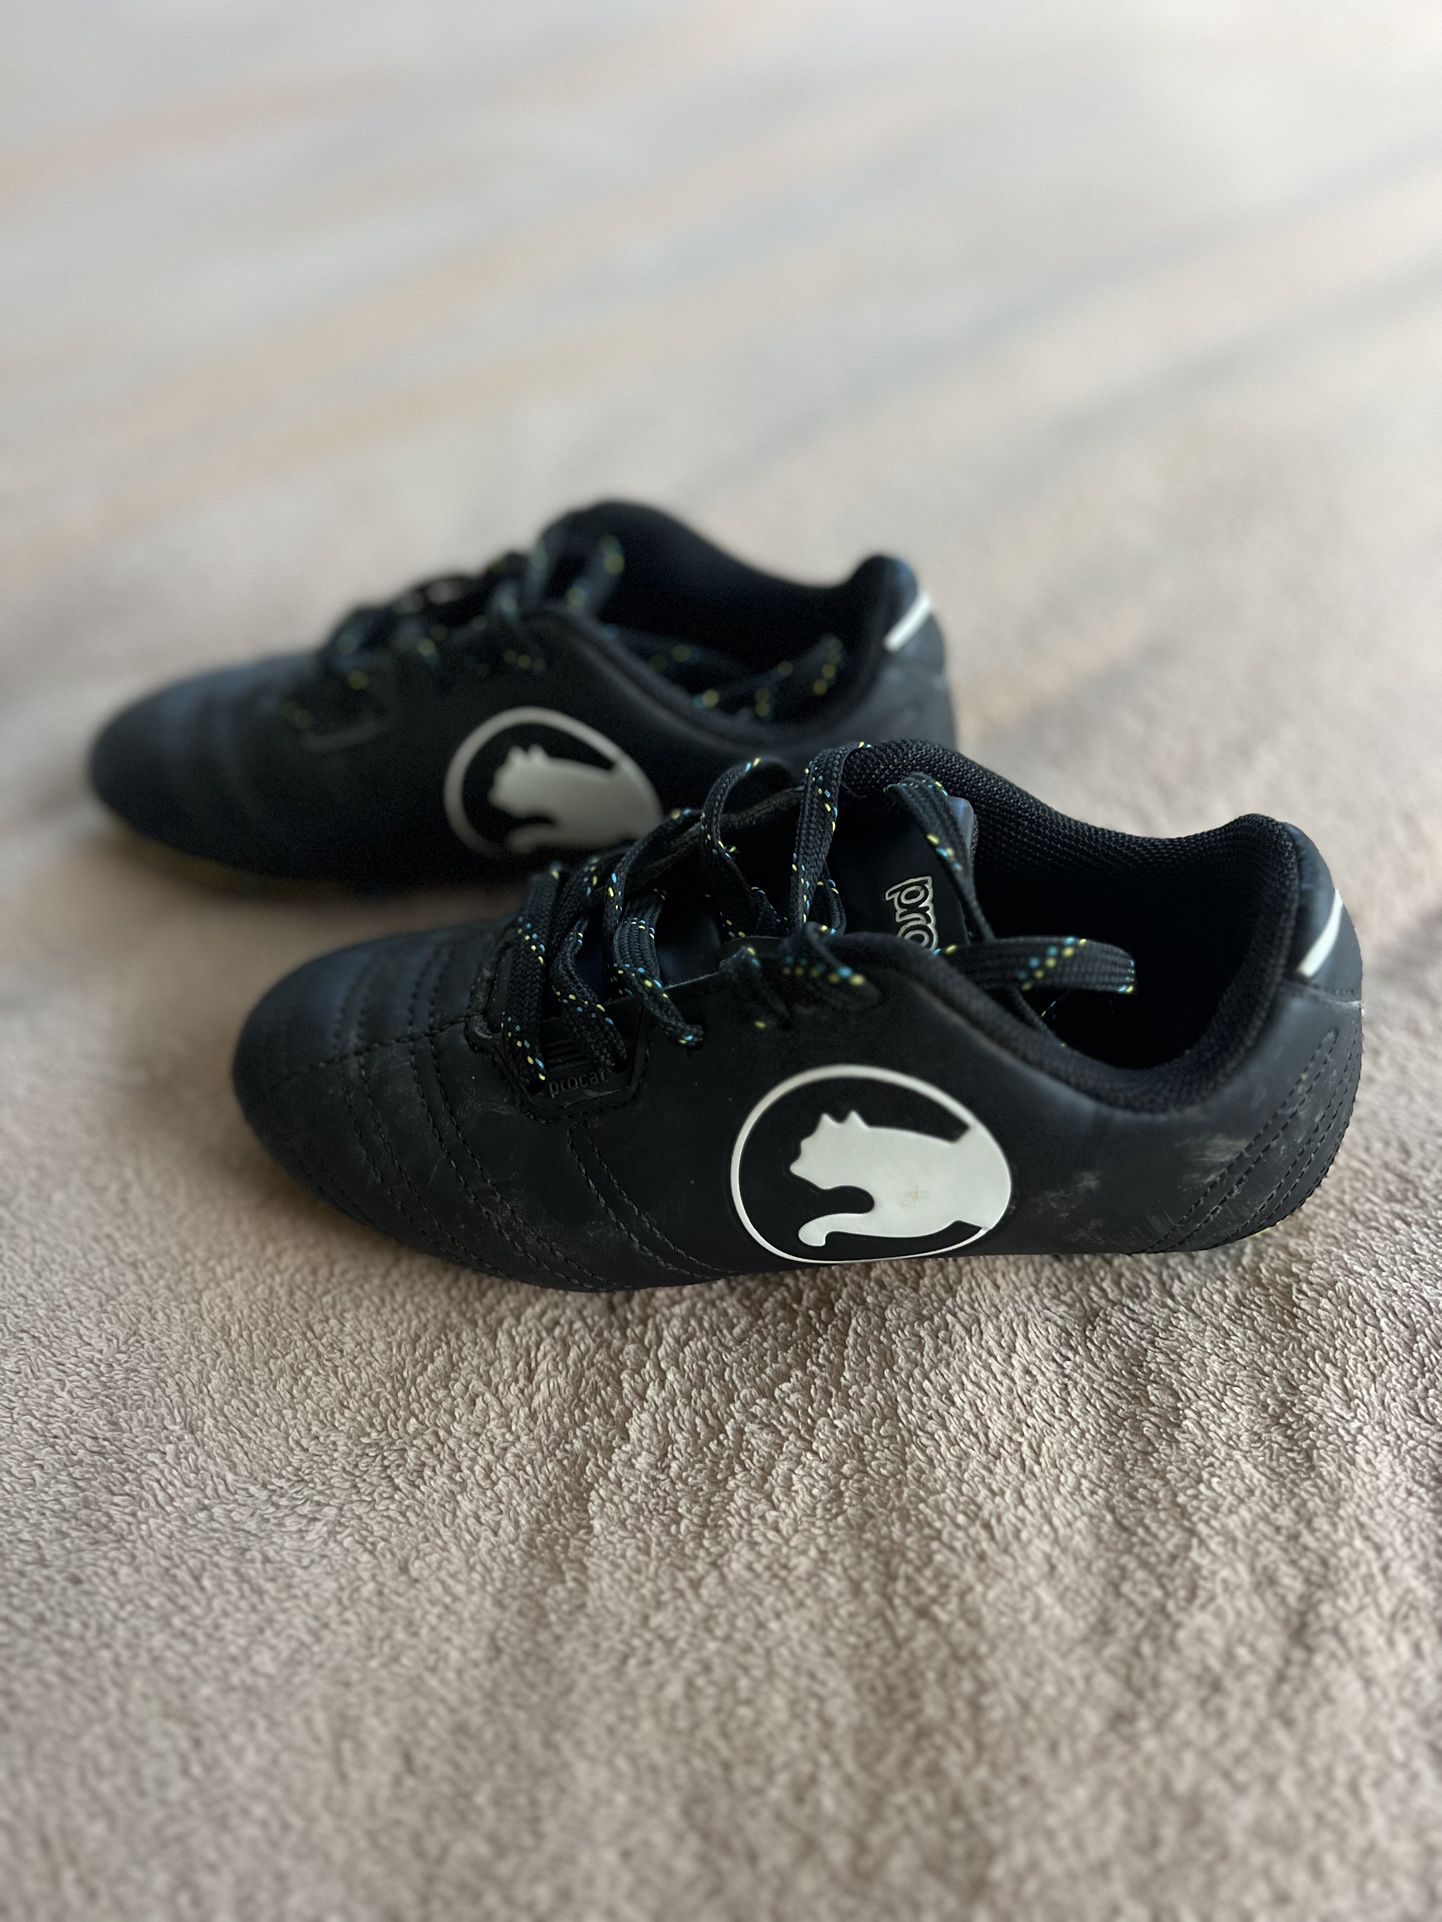 Kid’s Soccer Cleats